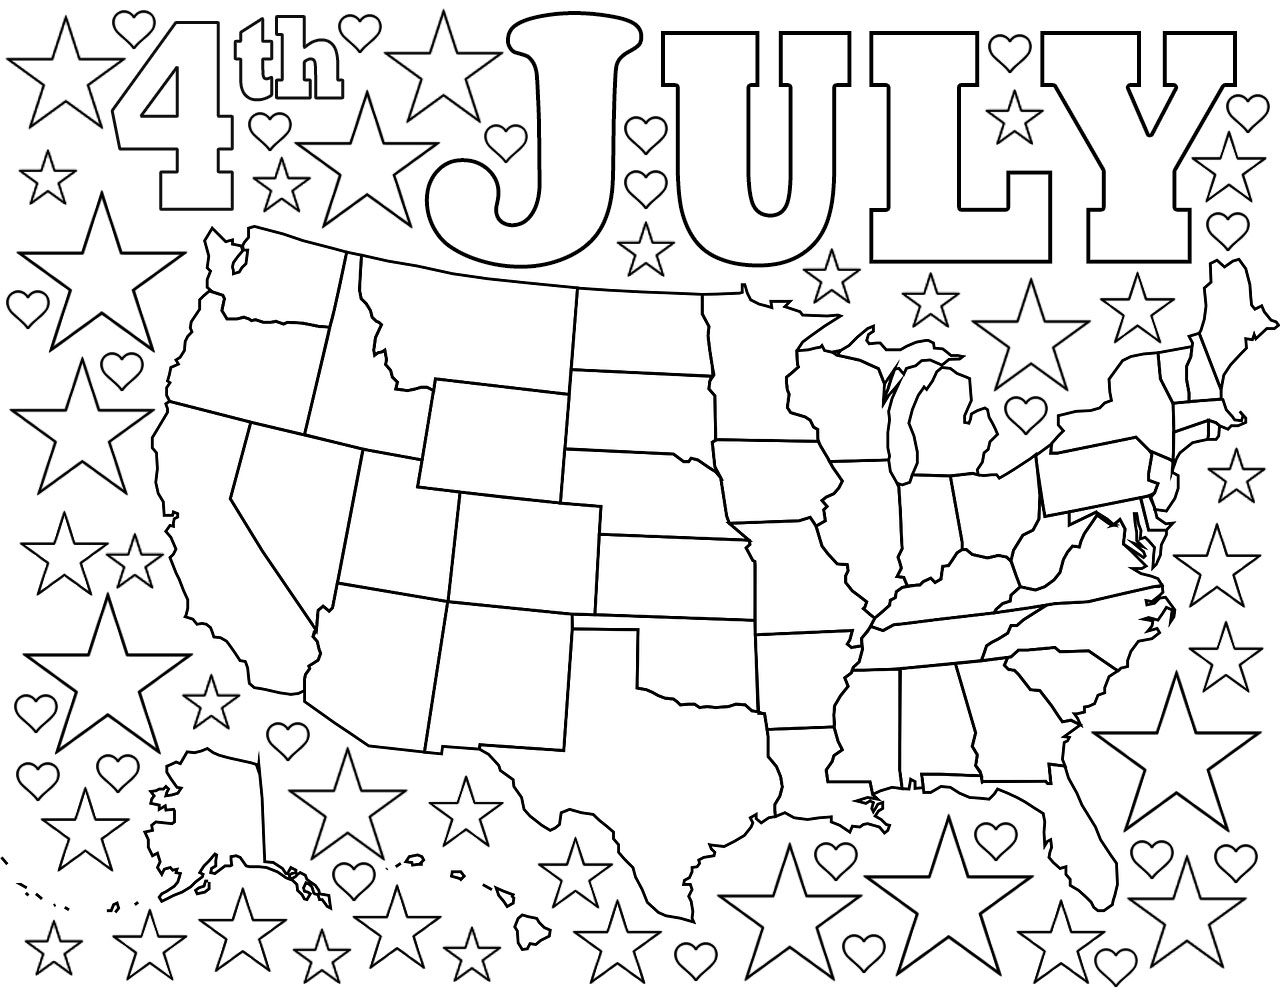 Th july loring page map of usa with stars and hearts rooftop post printables